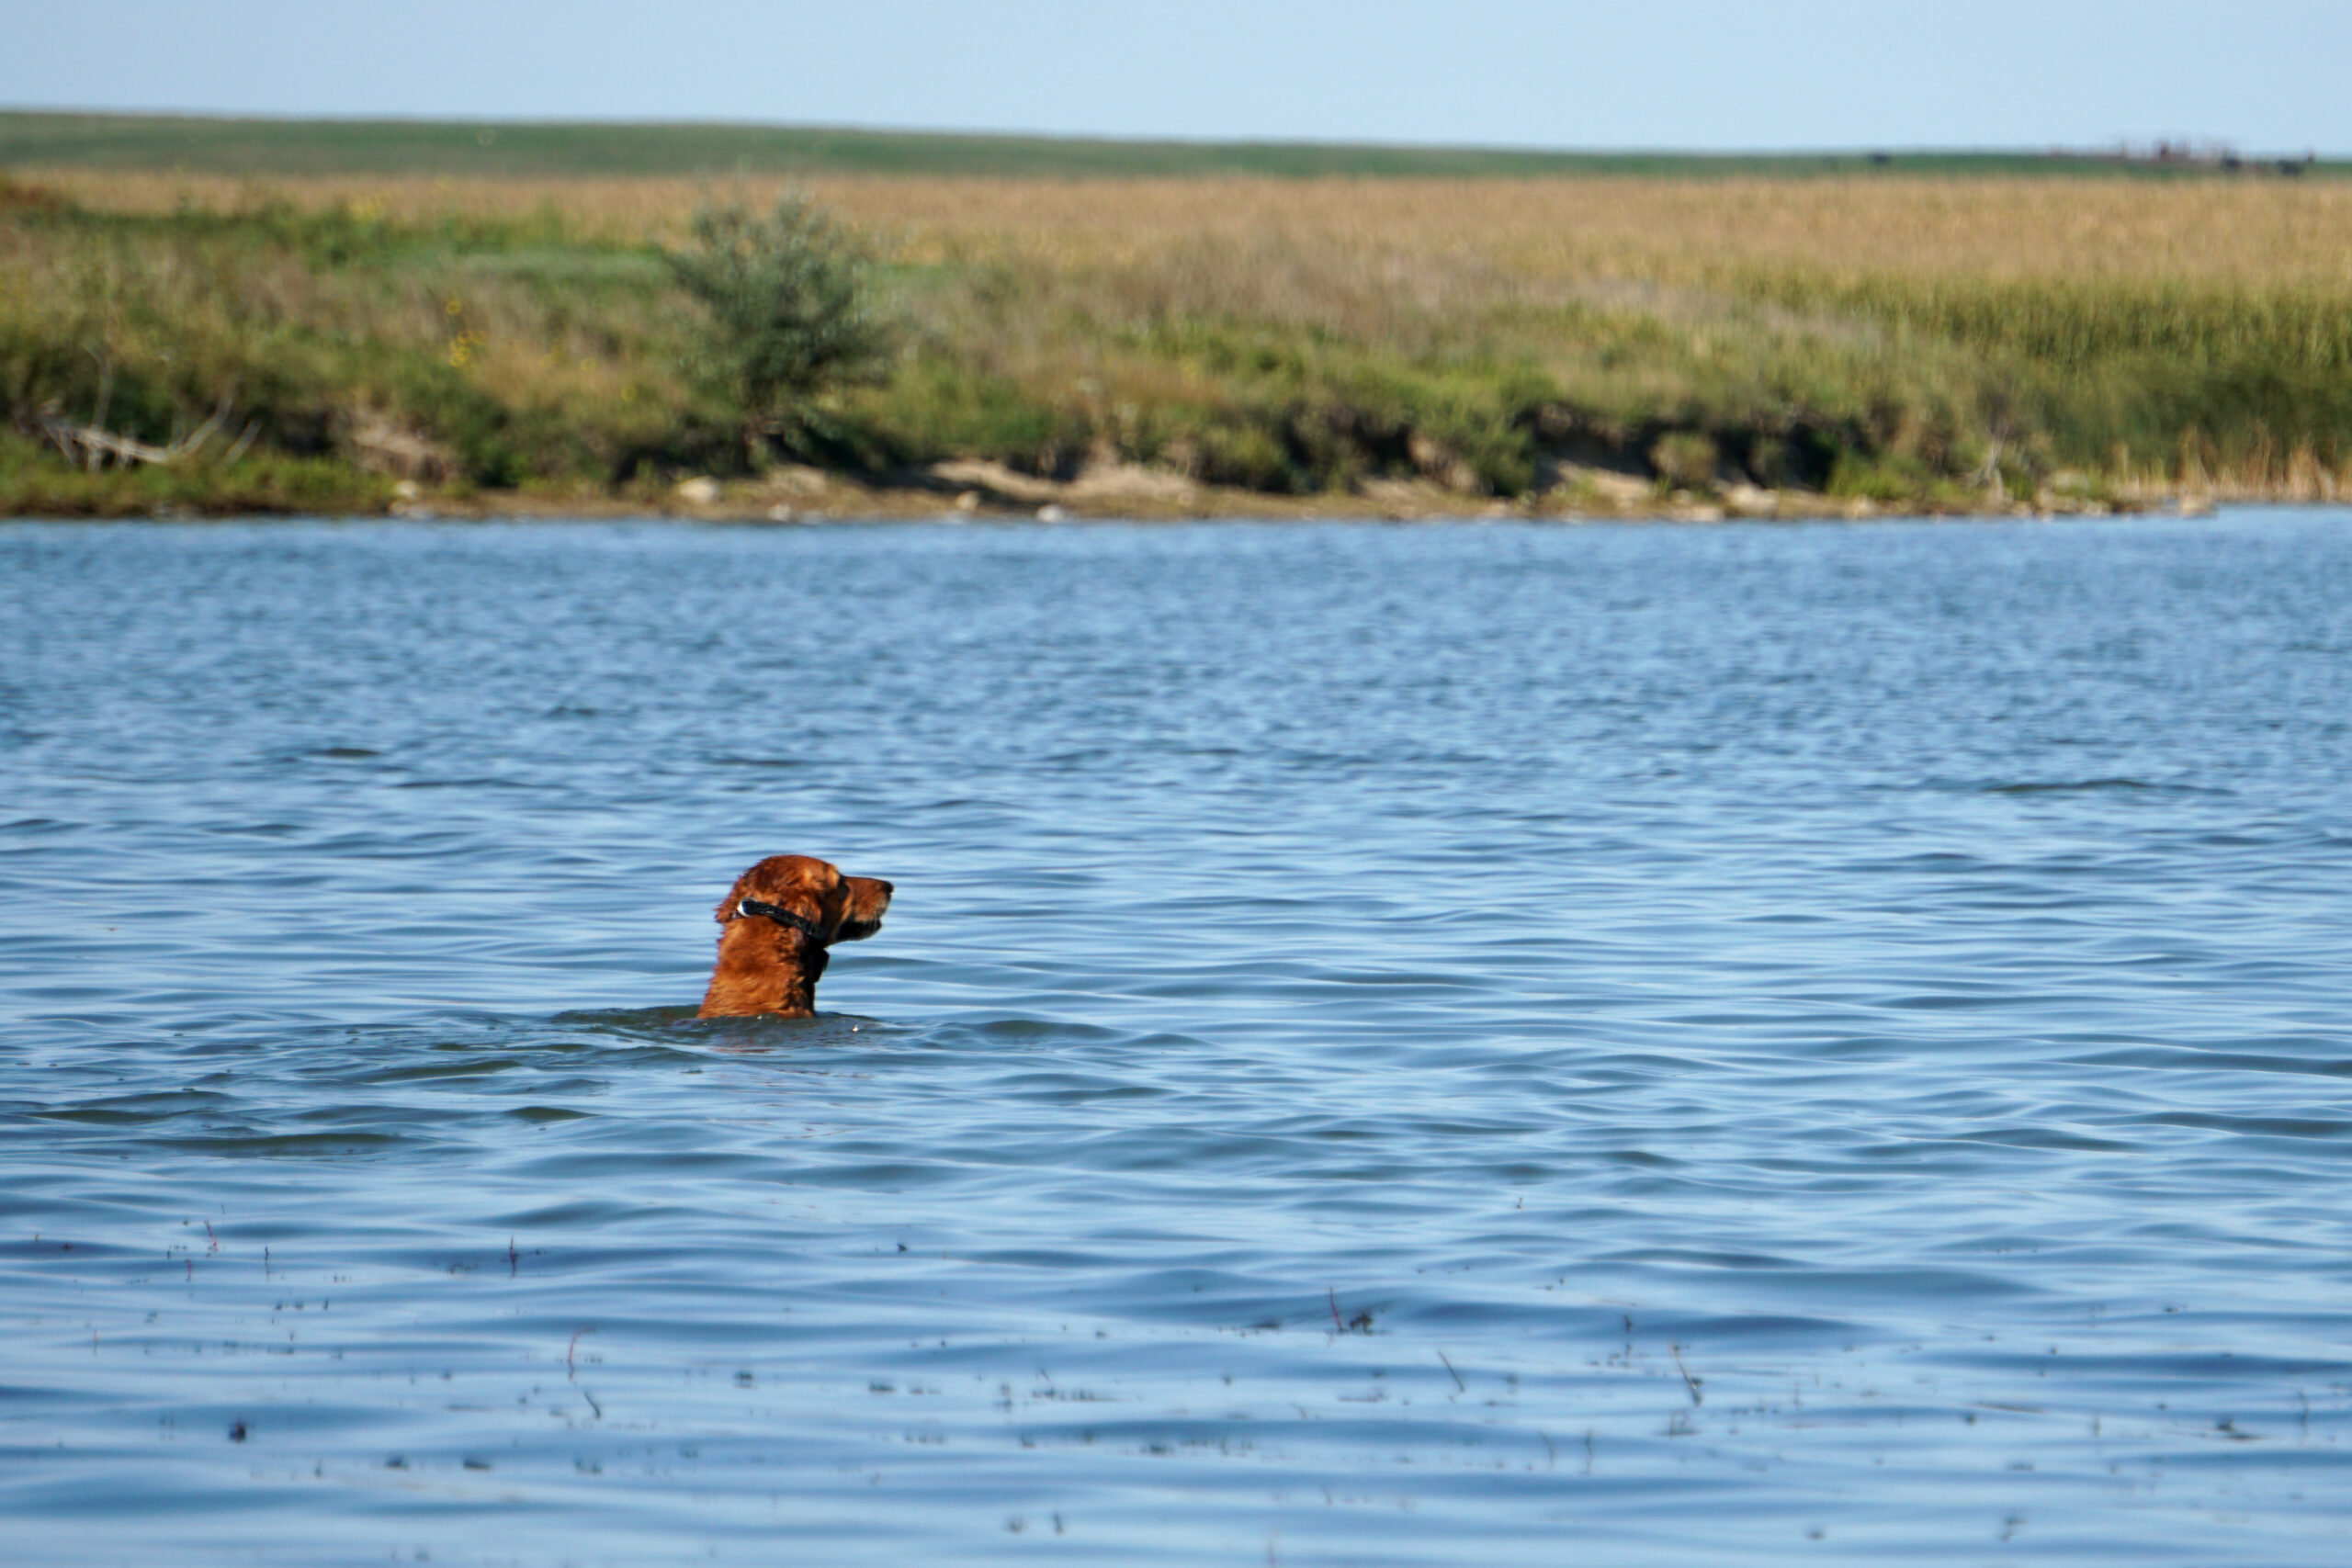 A good retriever helps reduce waterfowl crippling rates.